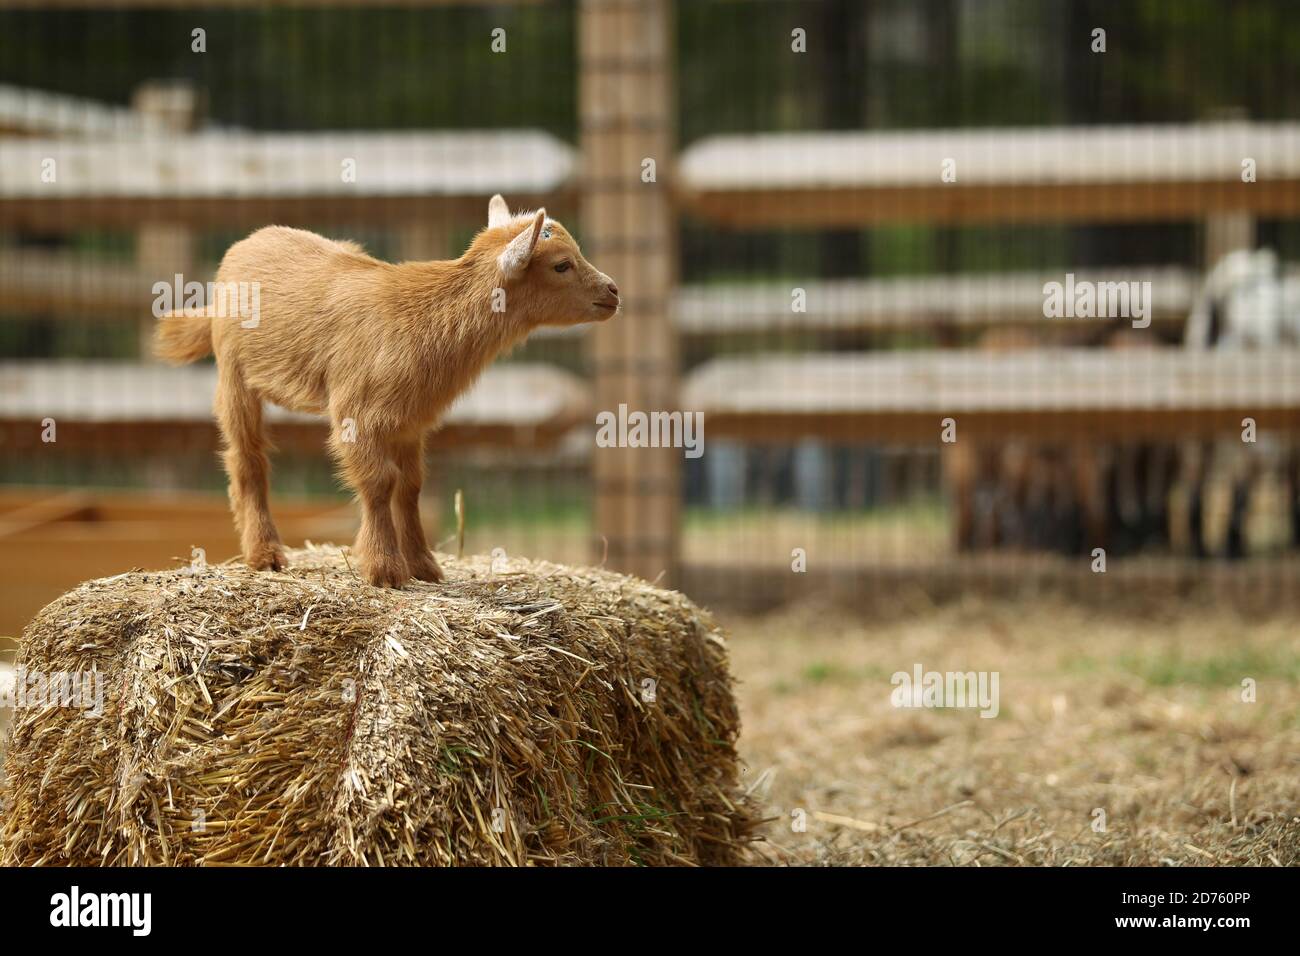 Lovely Baby Goat Stands on Hay on Farm, New England, US Stock Photo